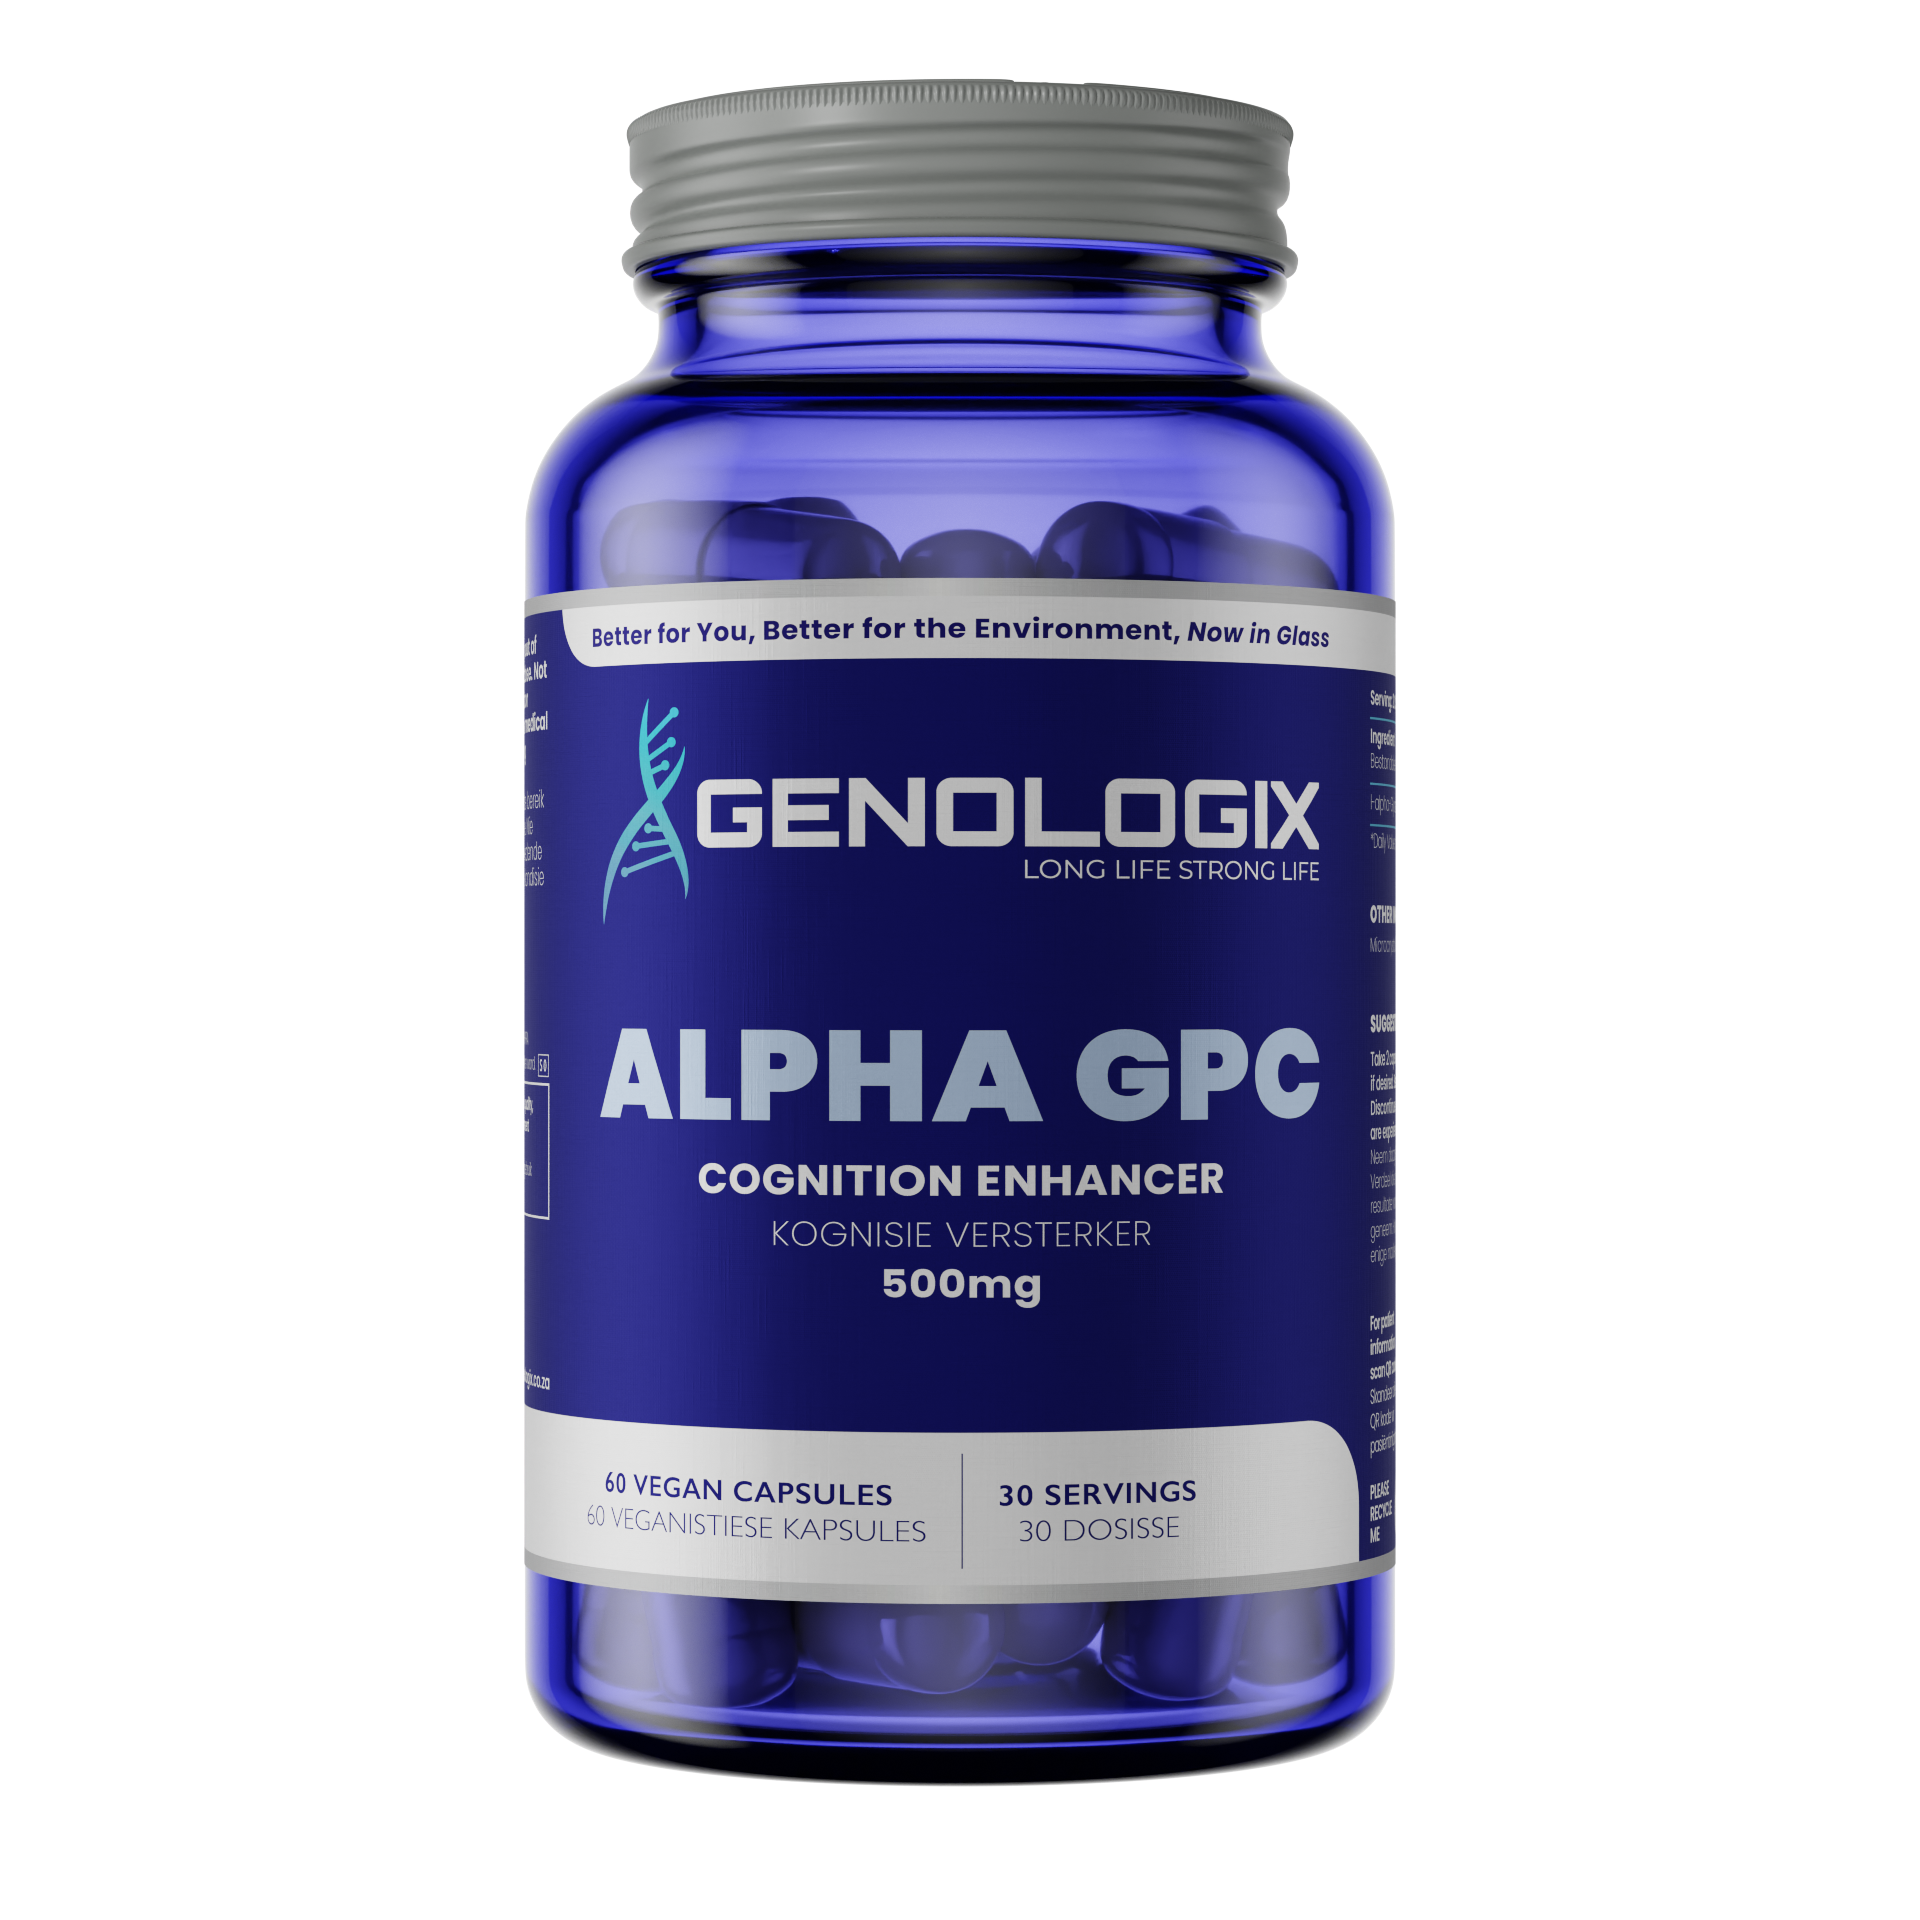 Alpha GPC Supplement Benefits, Dosage and Side Effects - Dr. Axe